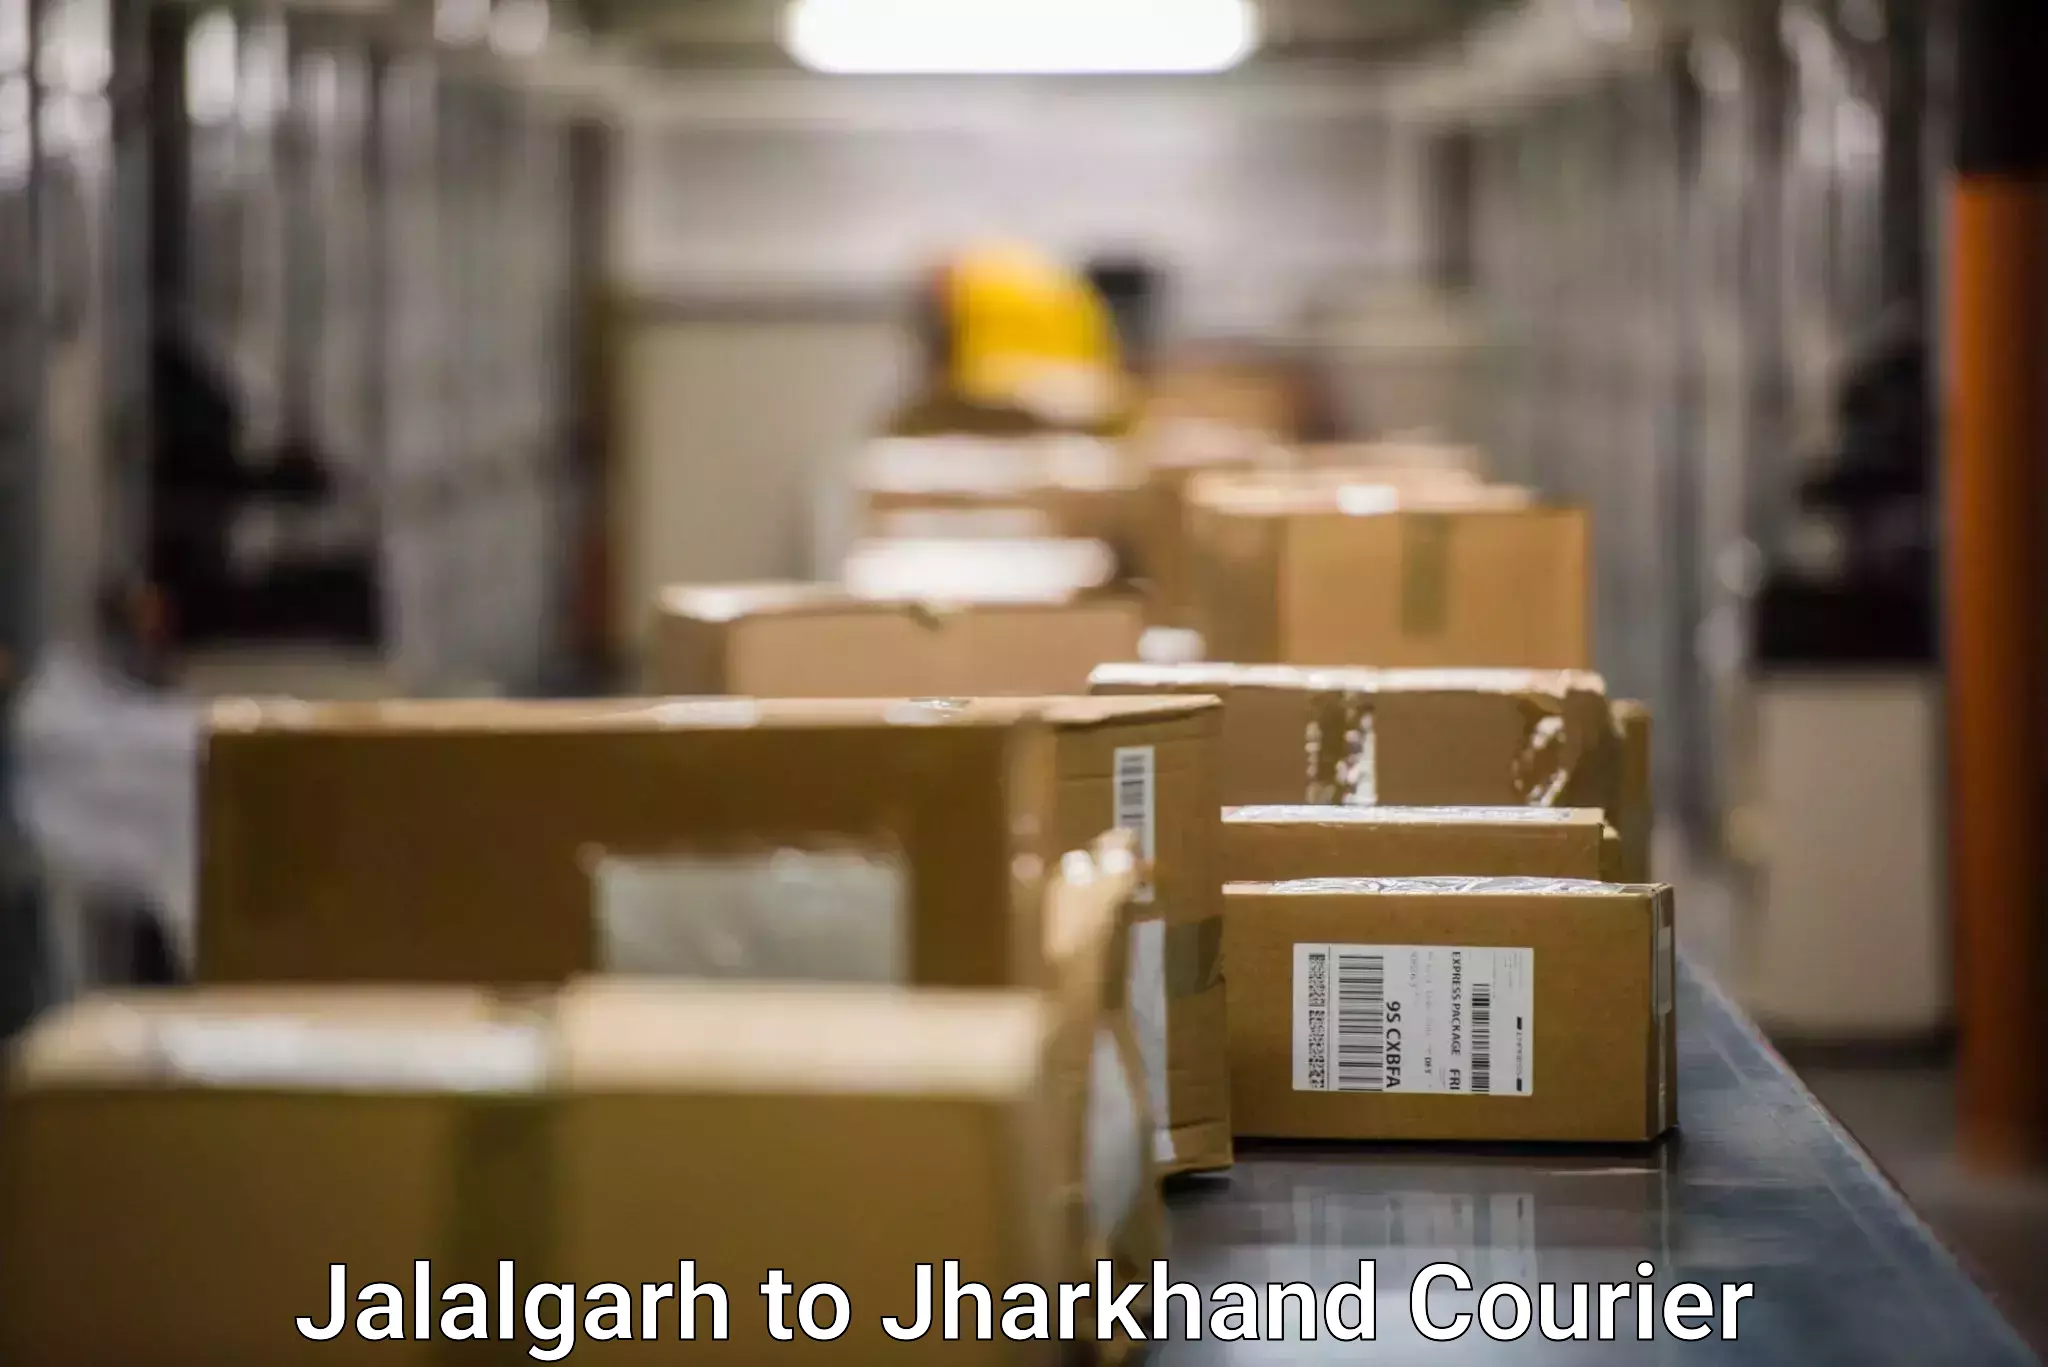 Nationwide shipping coverage Jalalgarh to Domchanch